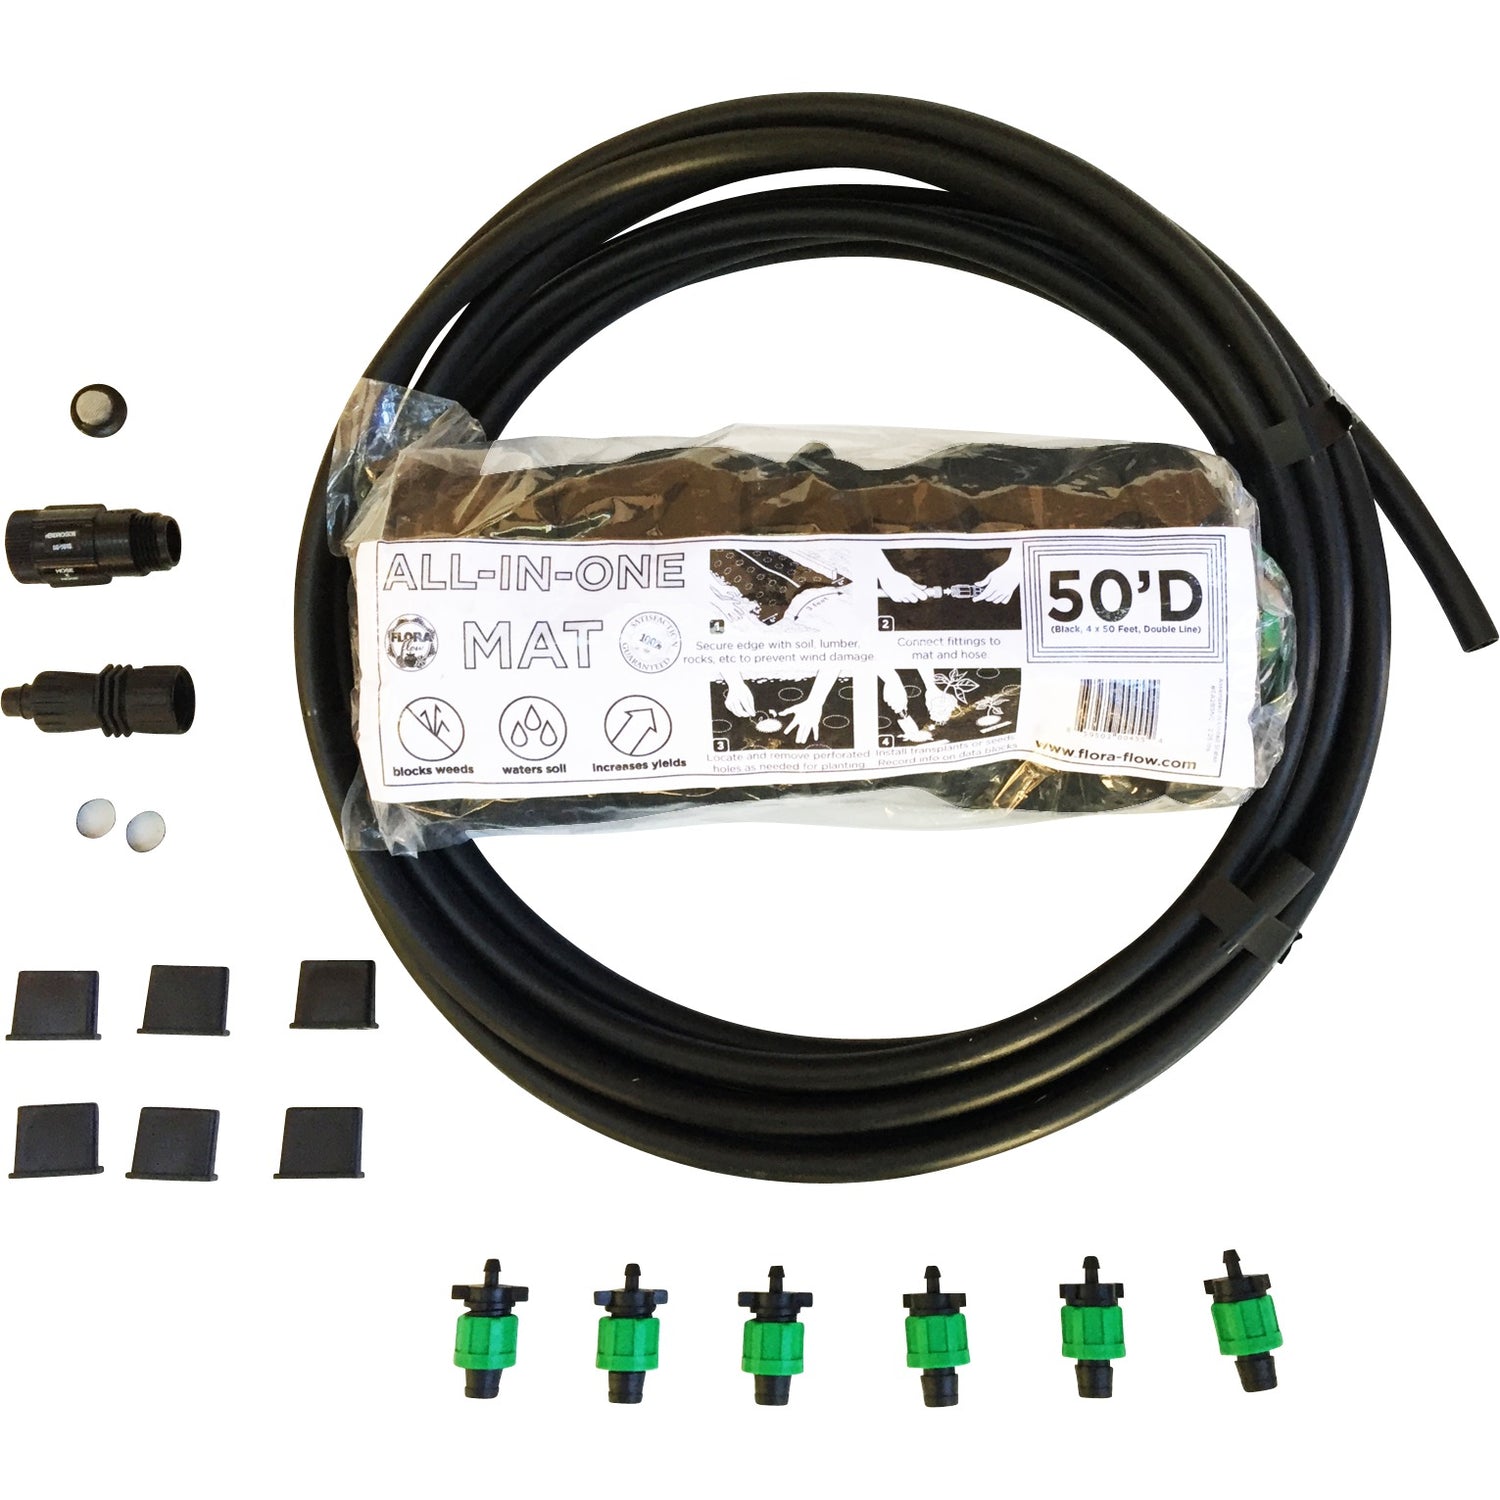 standard dual-line black all-in-one mat kit combines drip irrigation and plastic mulch.